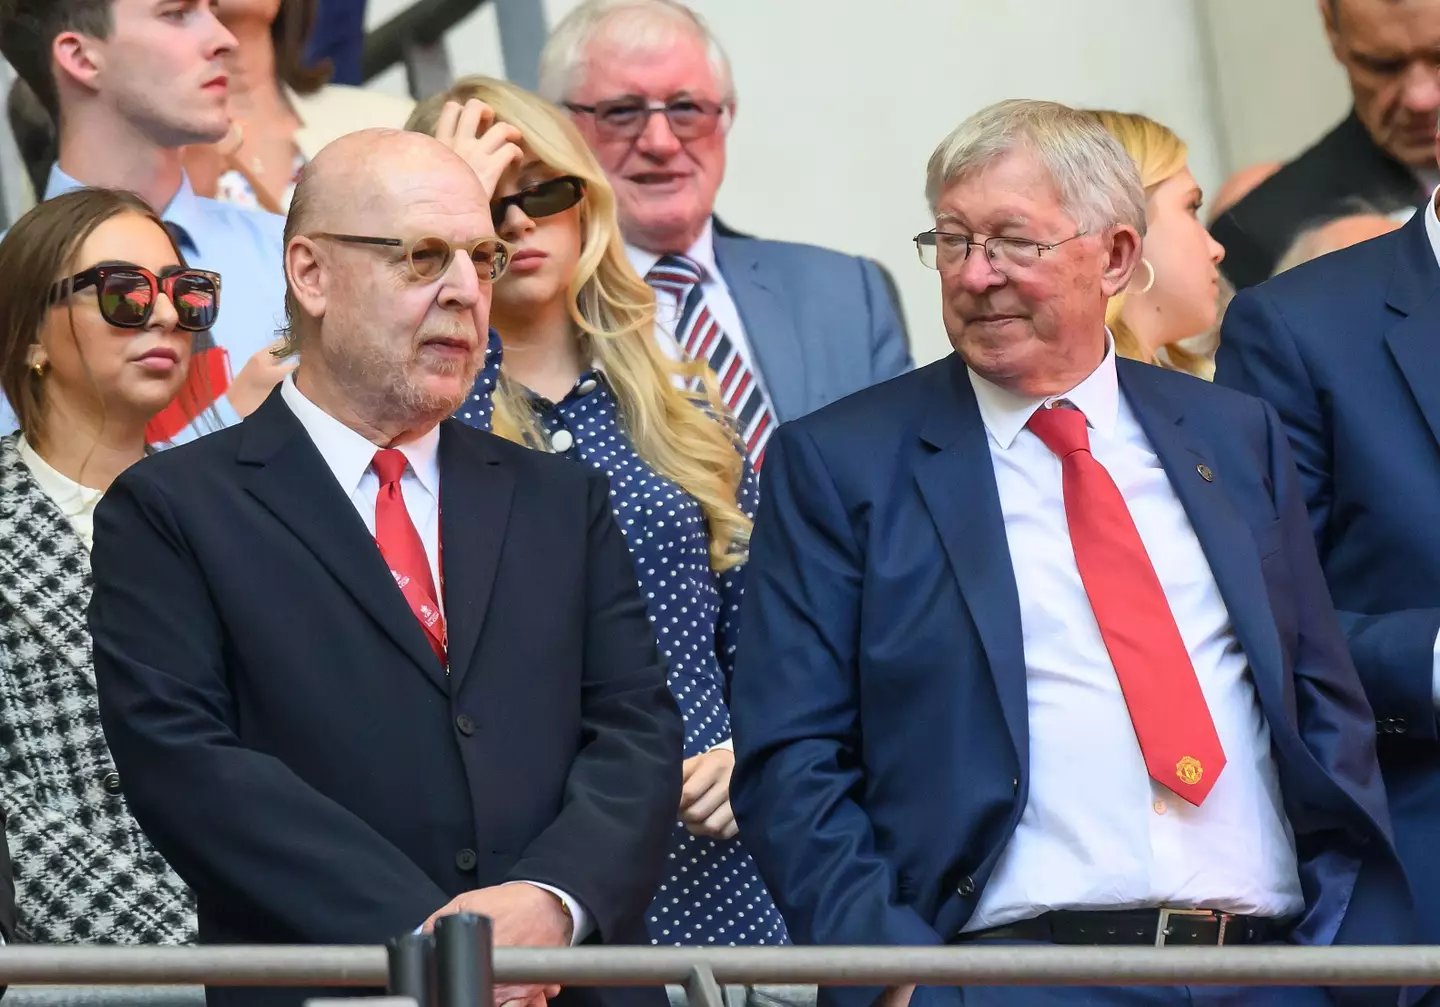 Avram Glazer was in attendance at the FA Cup final. Image: Alamy